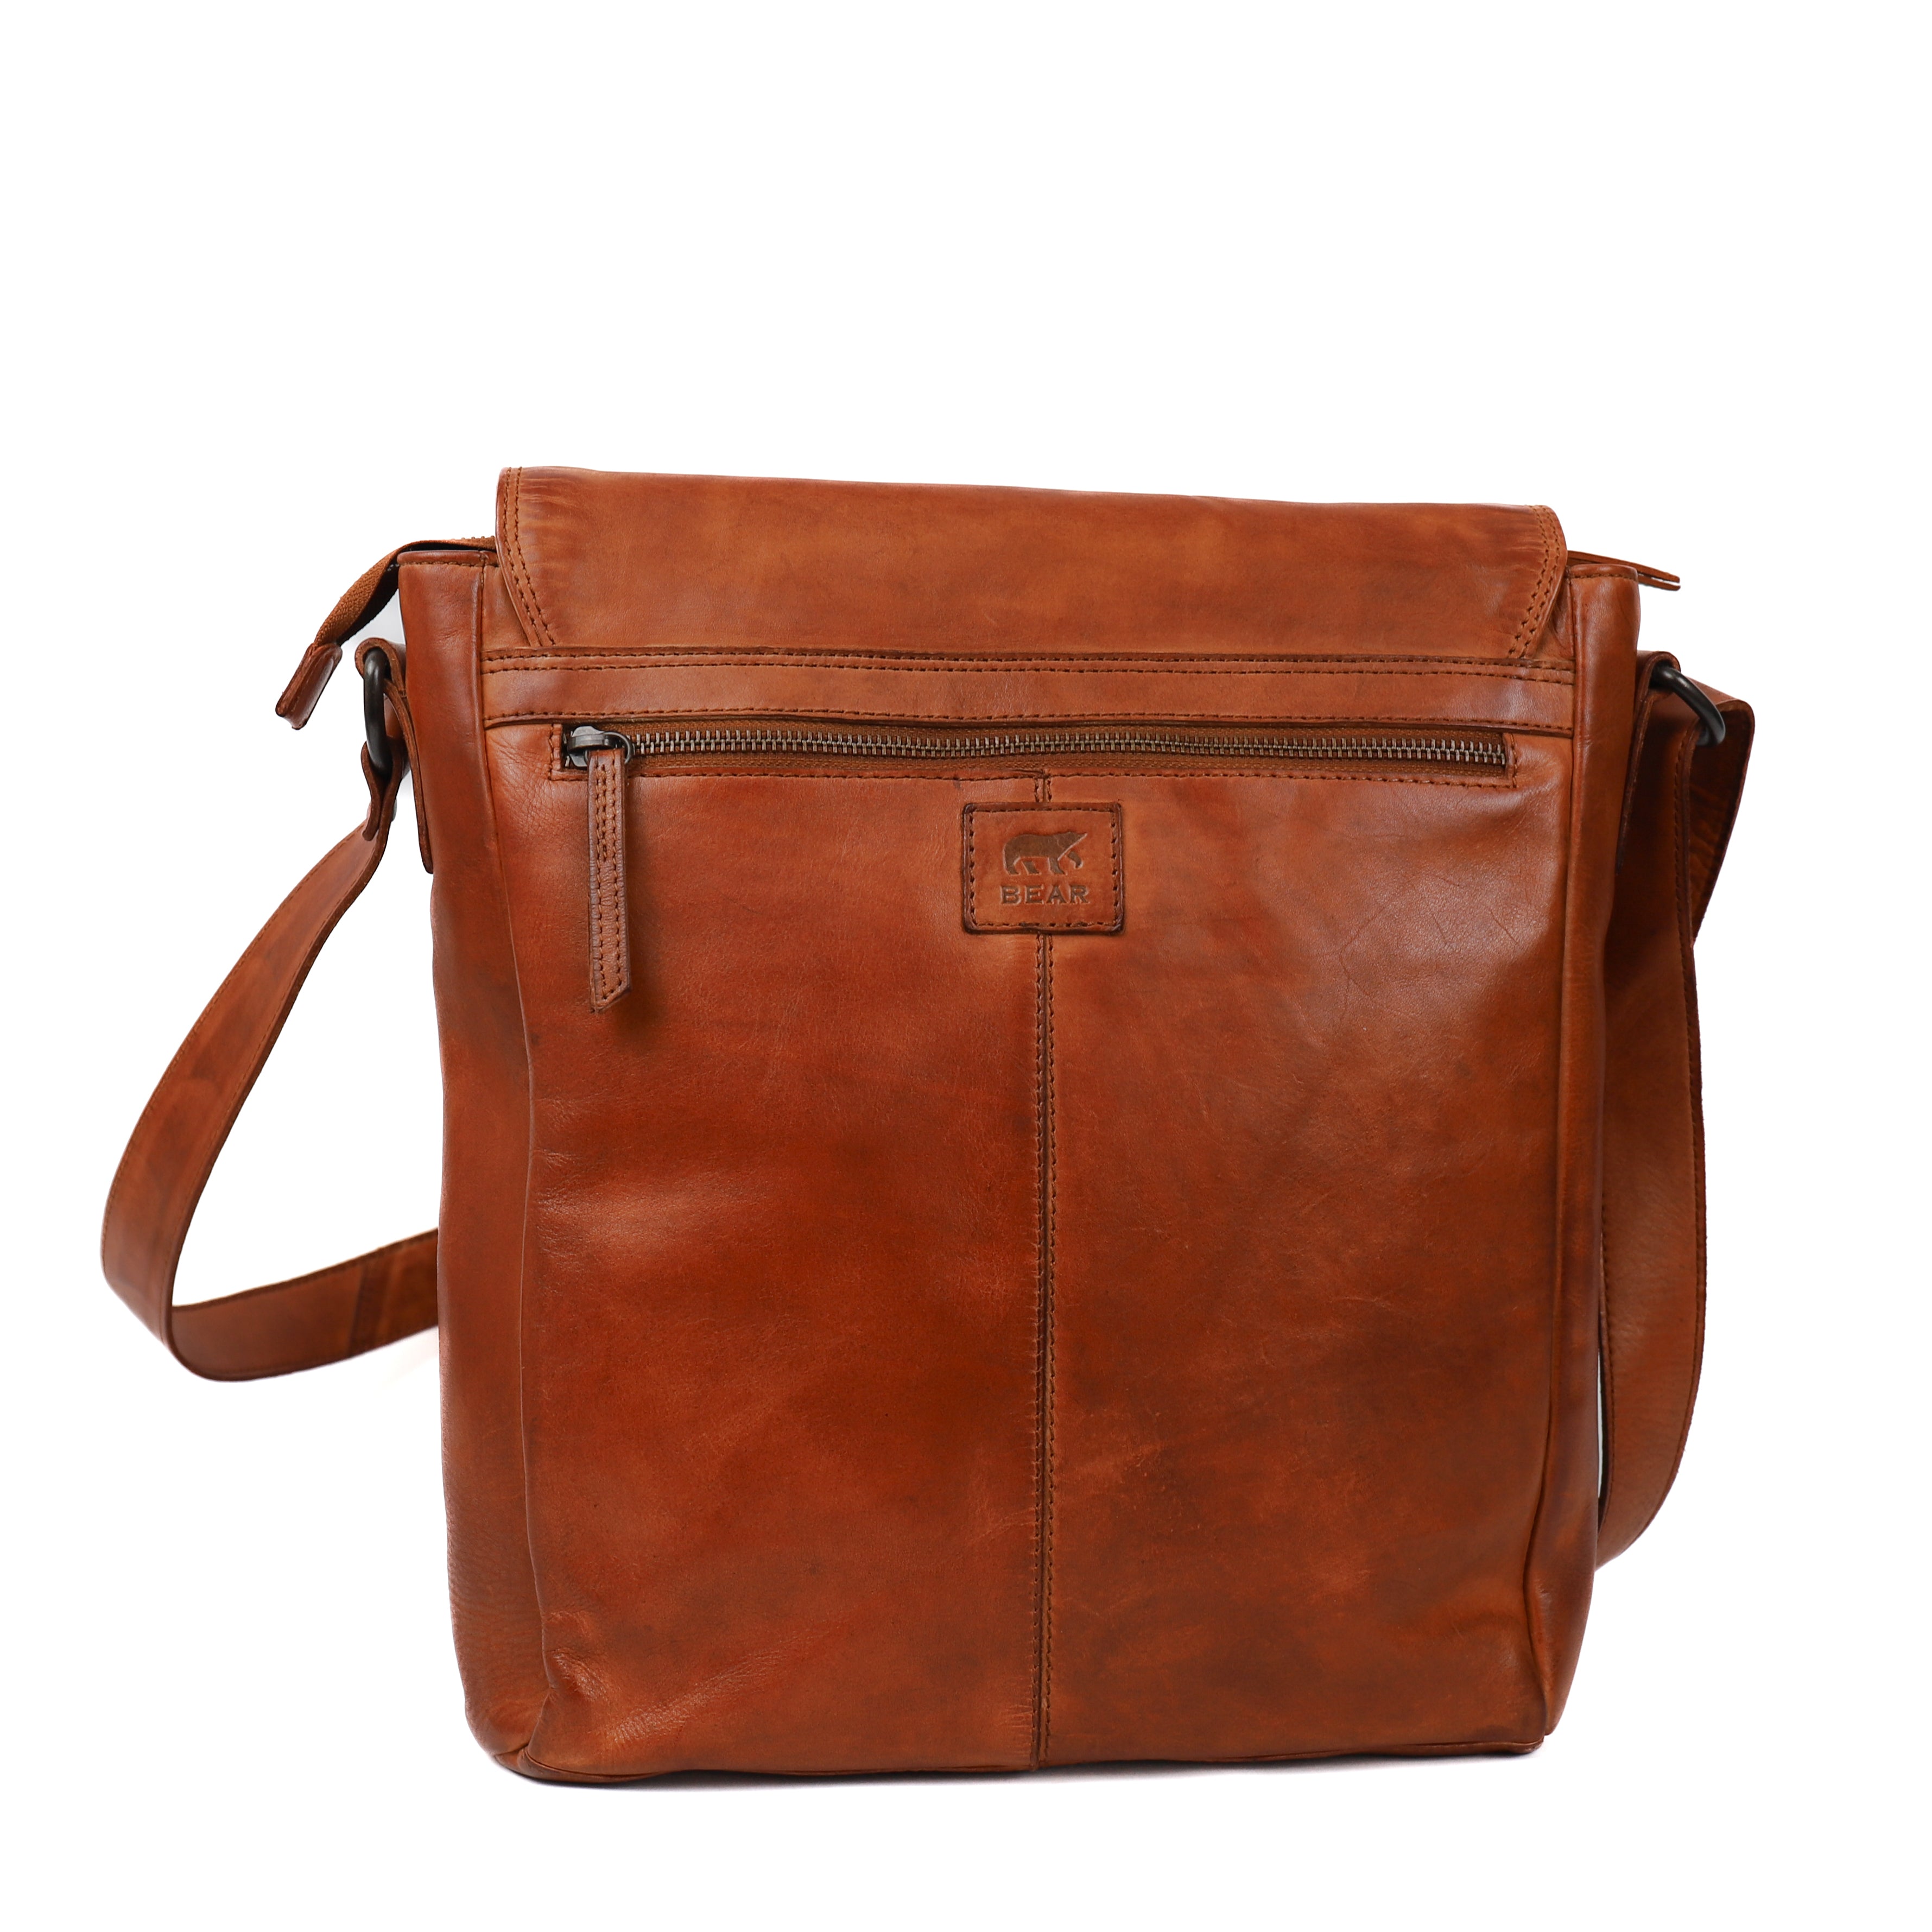 Mukama - Sandqvist bags have arrived in stock. This one, Dustin bag, is  perfect for office with 15